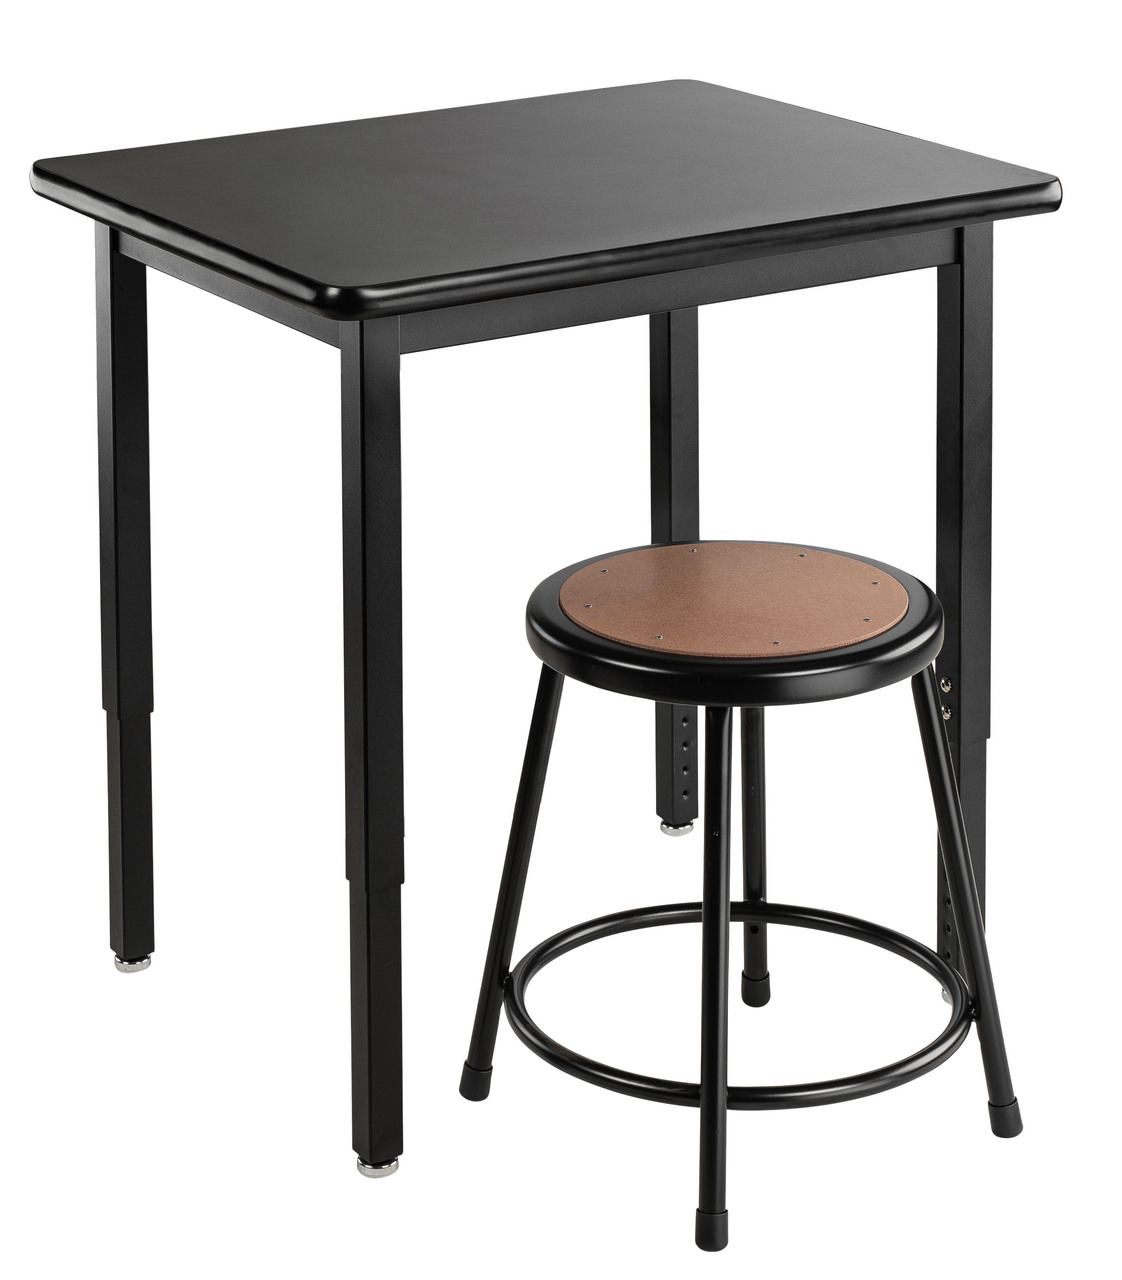 NPS Steel Science Lab Table, 24" x 30", HPL Top - Black Surface Color